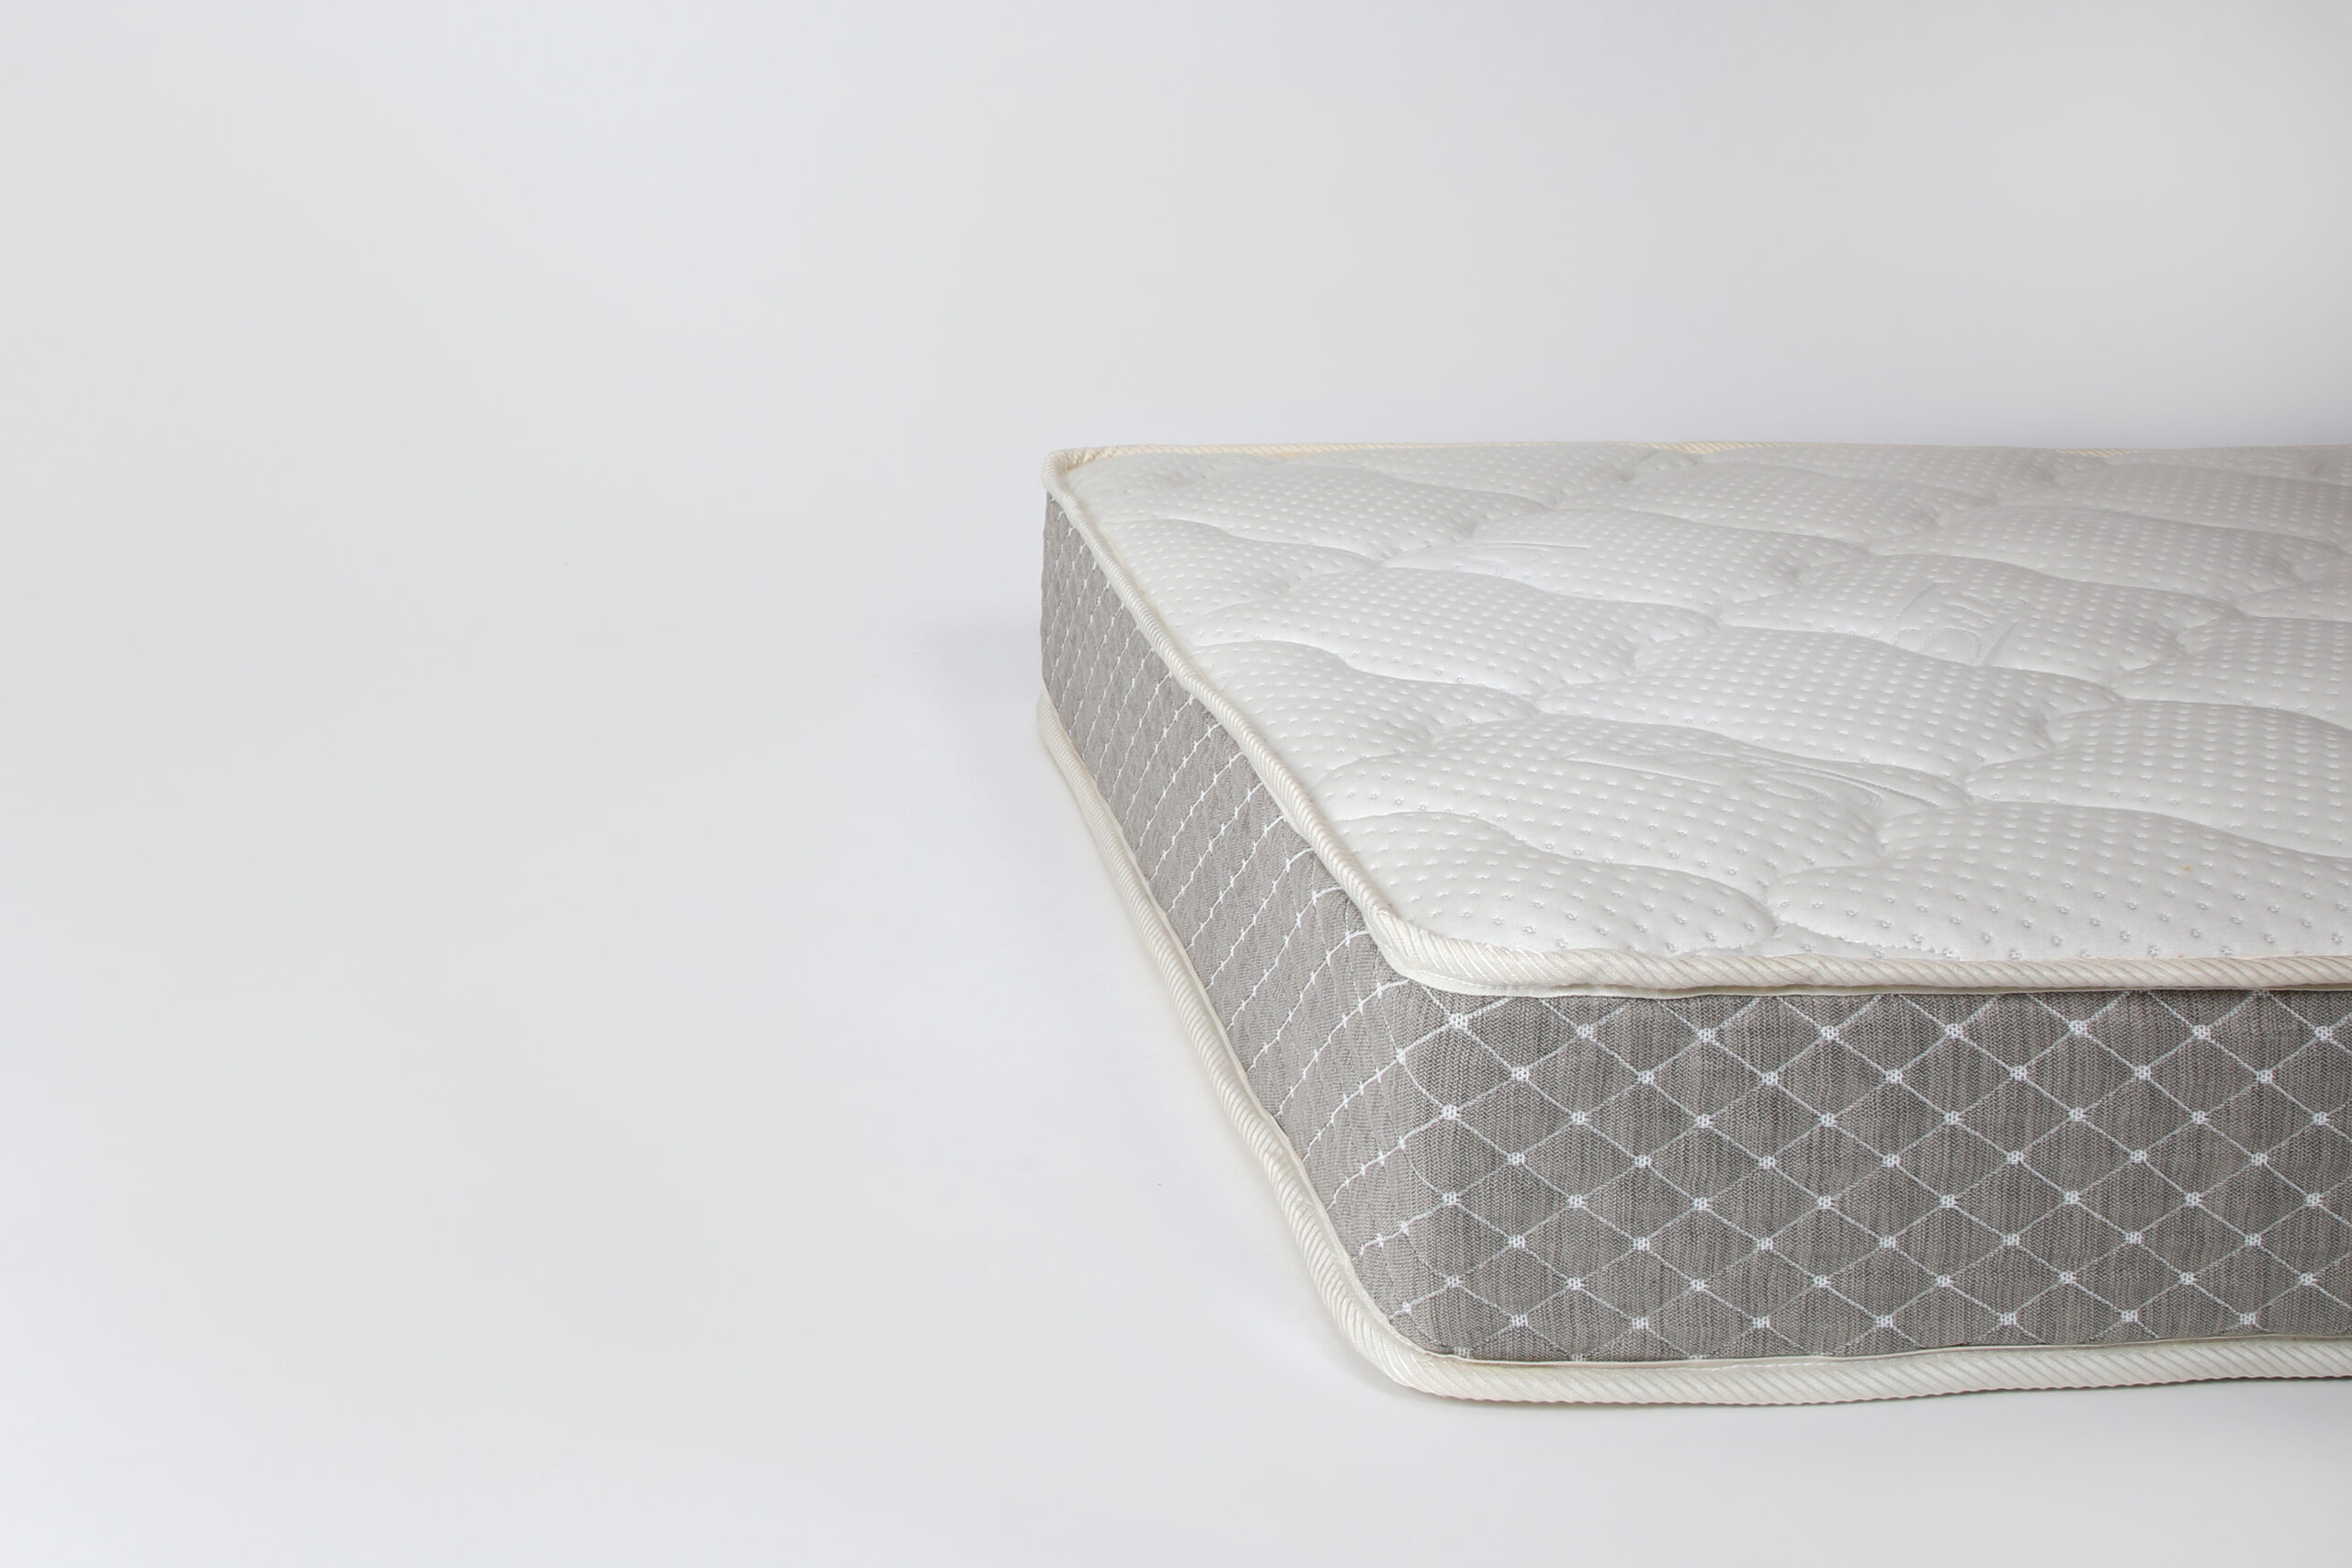 Latexan latex mattress by NAM House of sleep (picture 1)